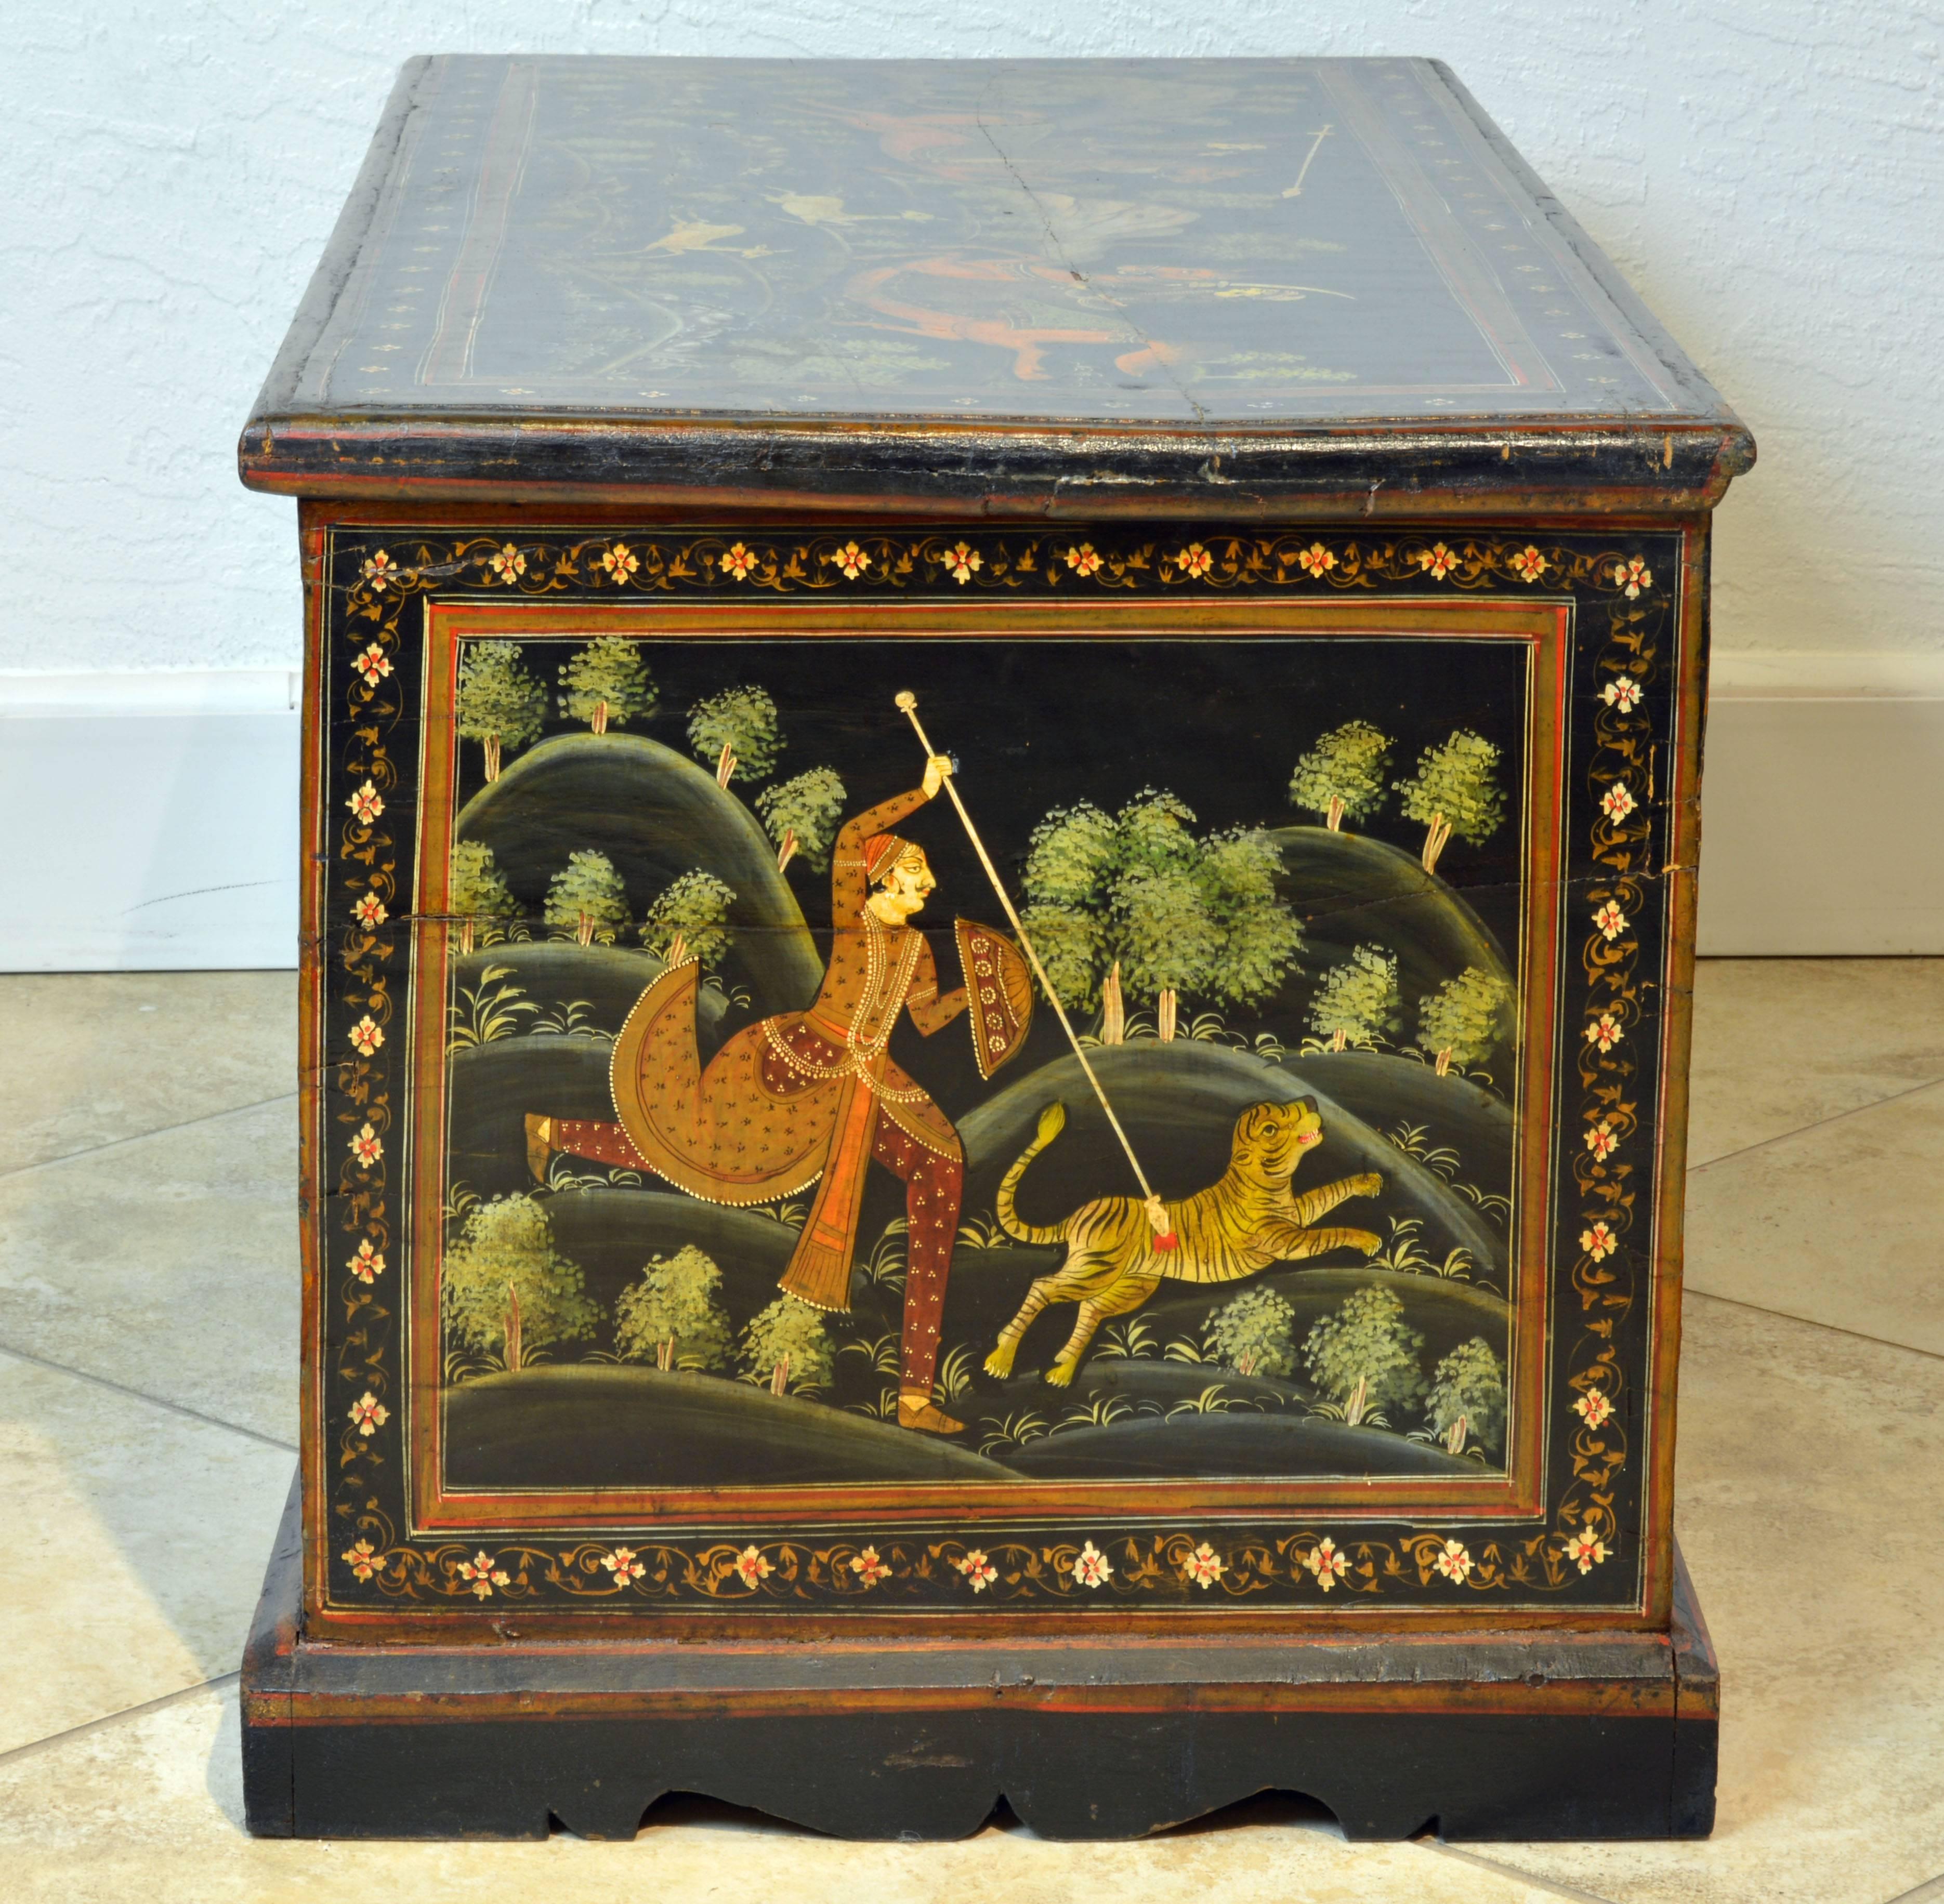 Anglo-Indian 19th Century Likely North Indian Mughal School Painted Chest with Hunting Scenes